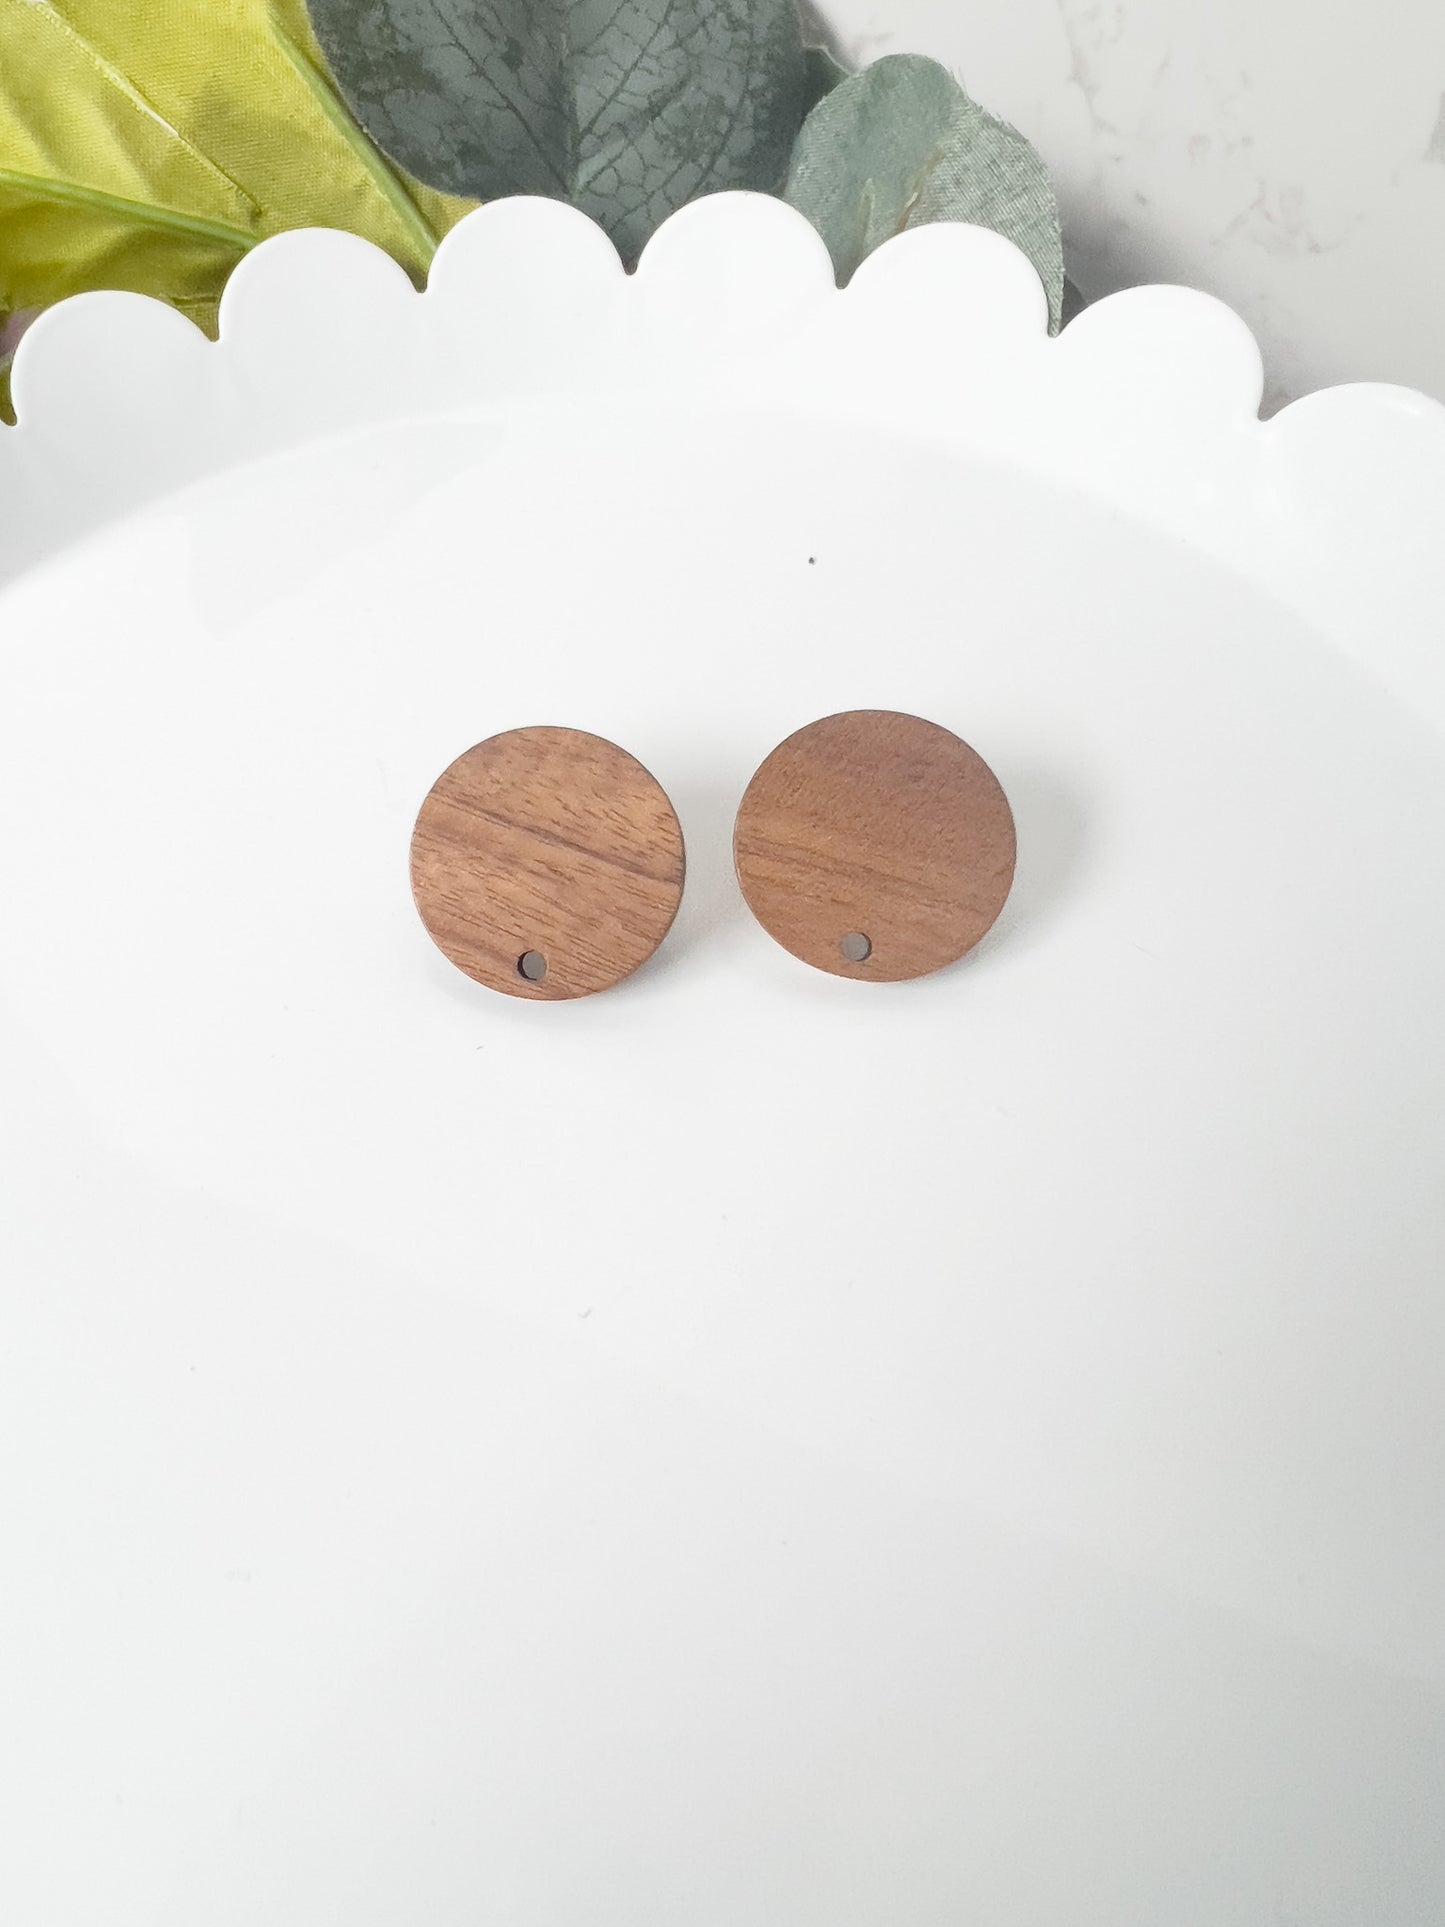 20mm Circle Wooden Stud Finding - 10 PIECES